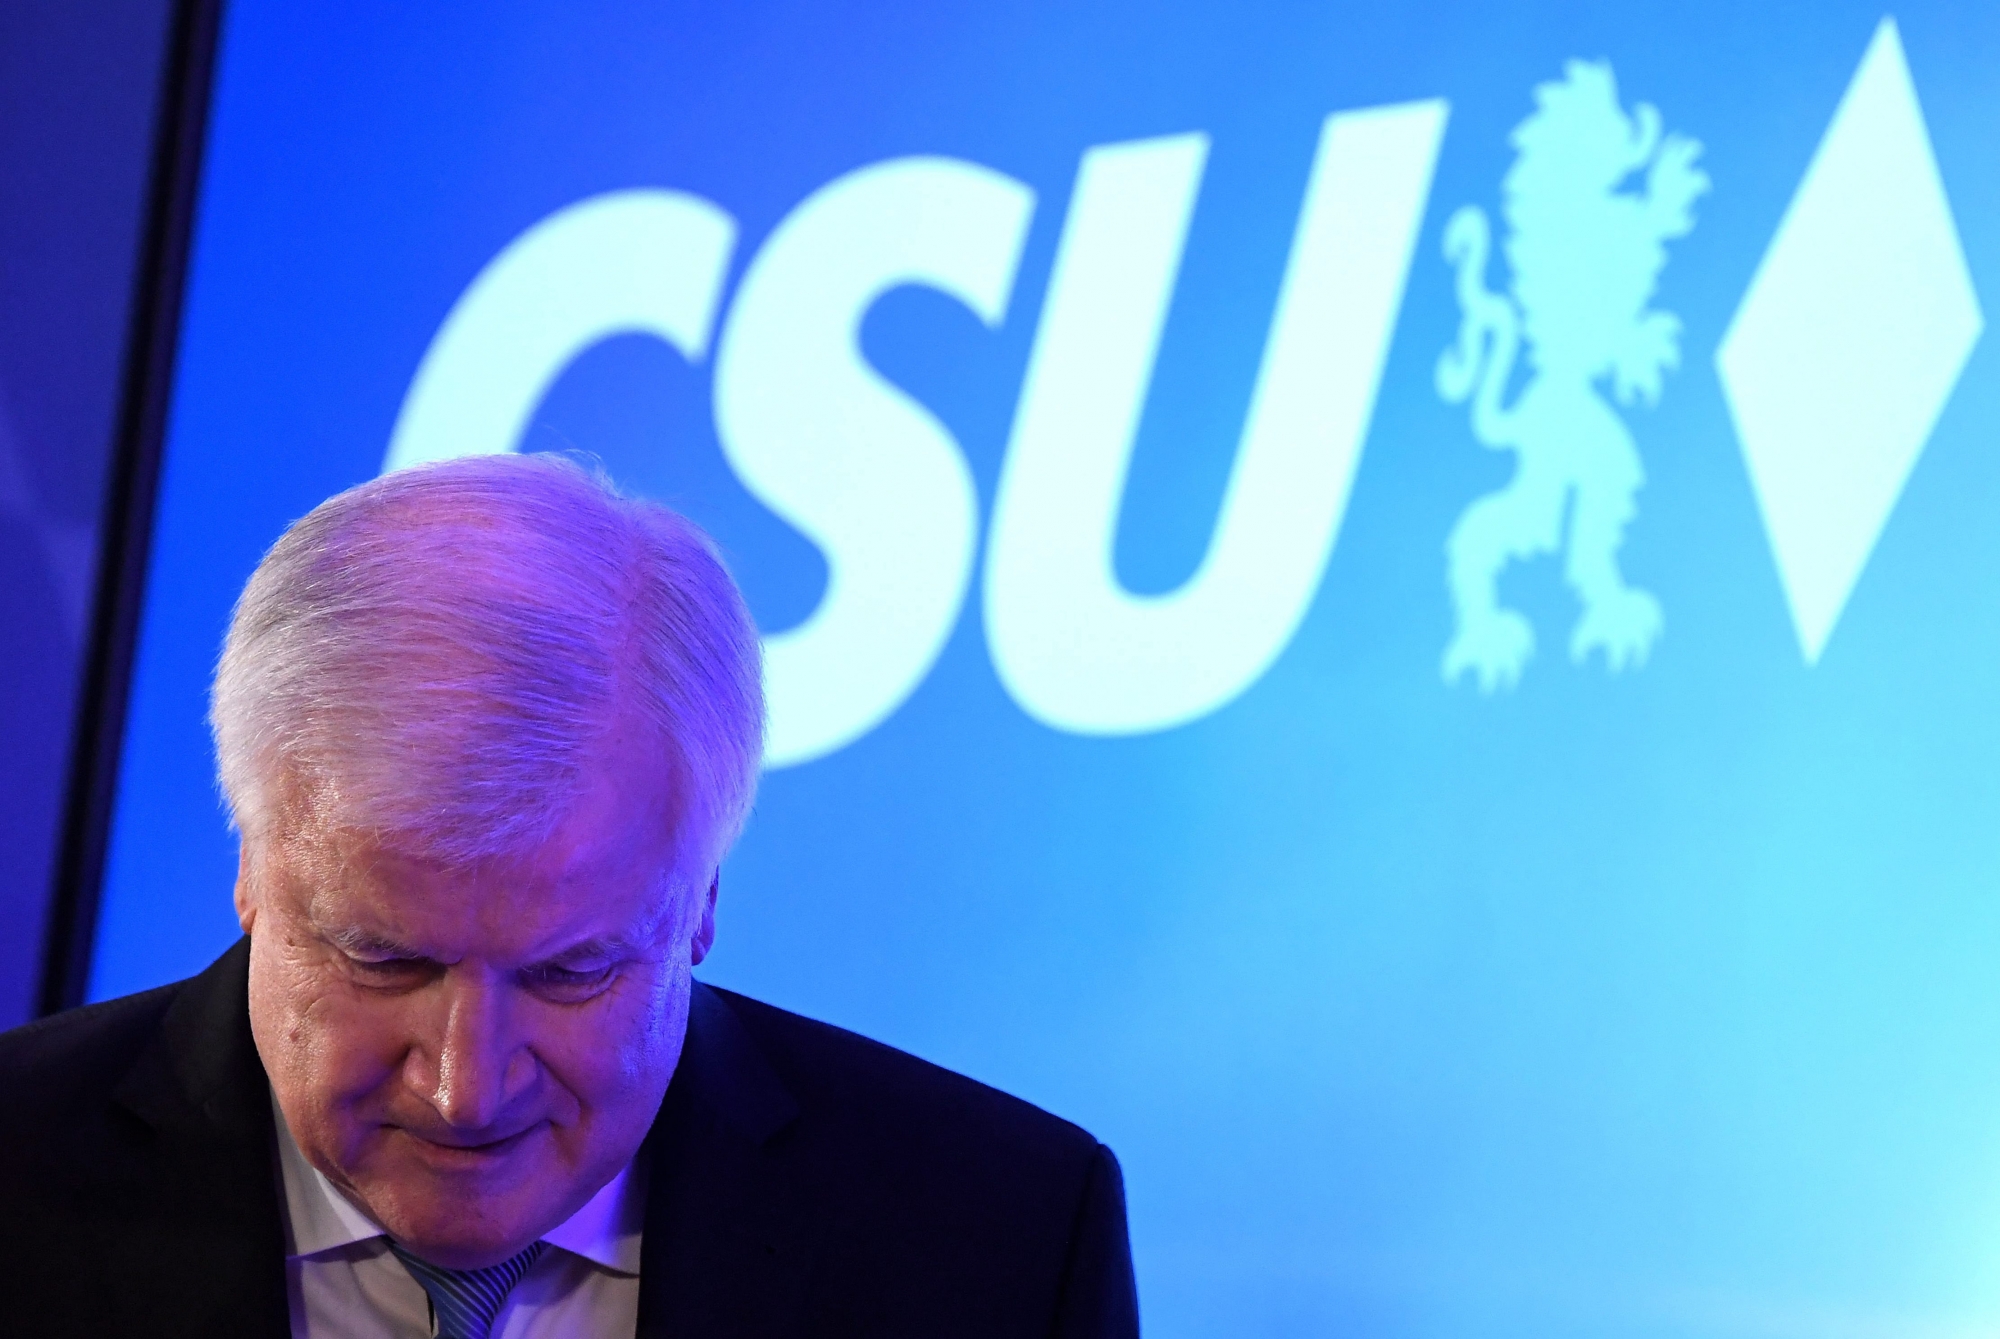 epa07093088 German Minister of Interior, Construction and Homeland and Christian Social Union (CSU) party chairman Horst Seehofer speaks to supporters during the Bavaria state elections in Munich, Germany, 14 October 2018. According to the Bavarian state election commissioner some 9.5 million people were eligible to vote in the regional elections for a new parliament in the southern German state of Bavaria. According to first initial exit polls Christian Social Union  (CSU) party received 35.5 percent of votes.  EPA/CLEMENS BILAN GERMANY ELECTIONS BAVARIA